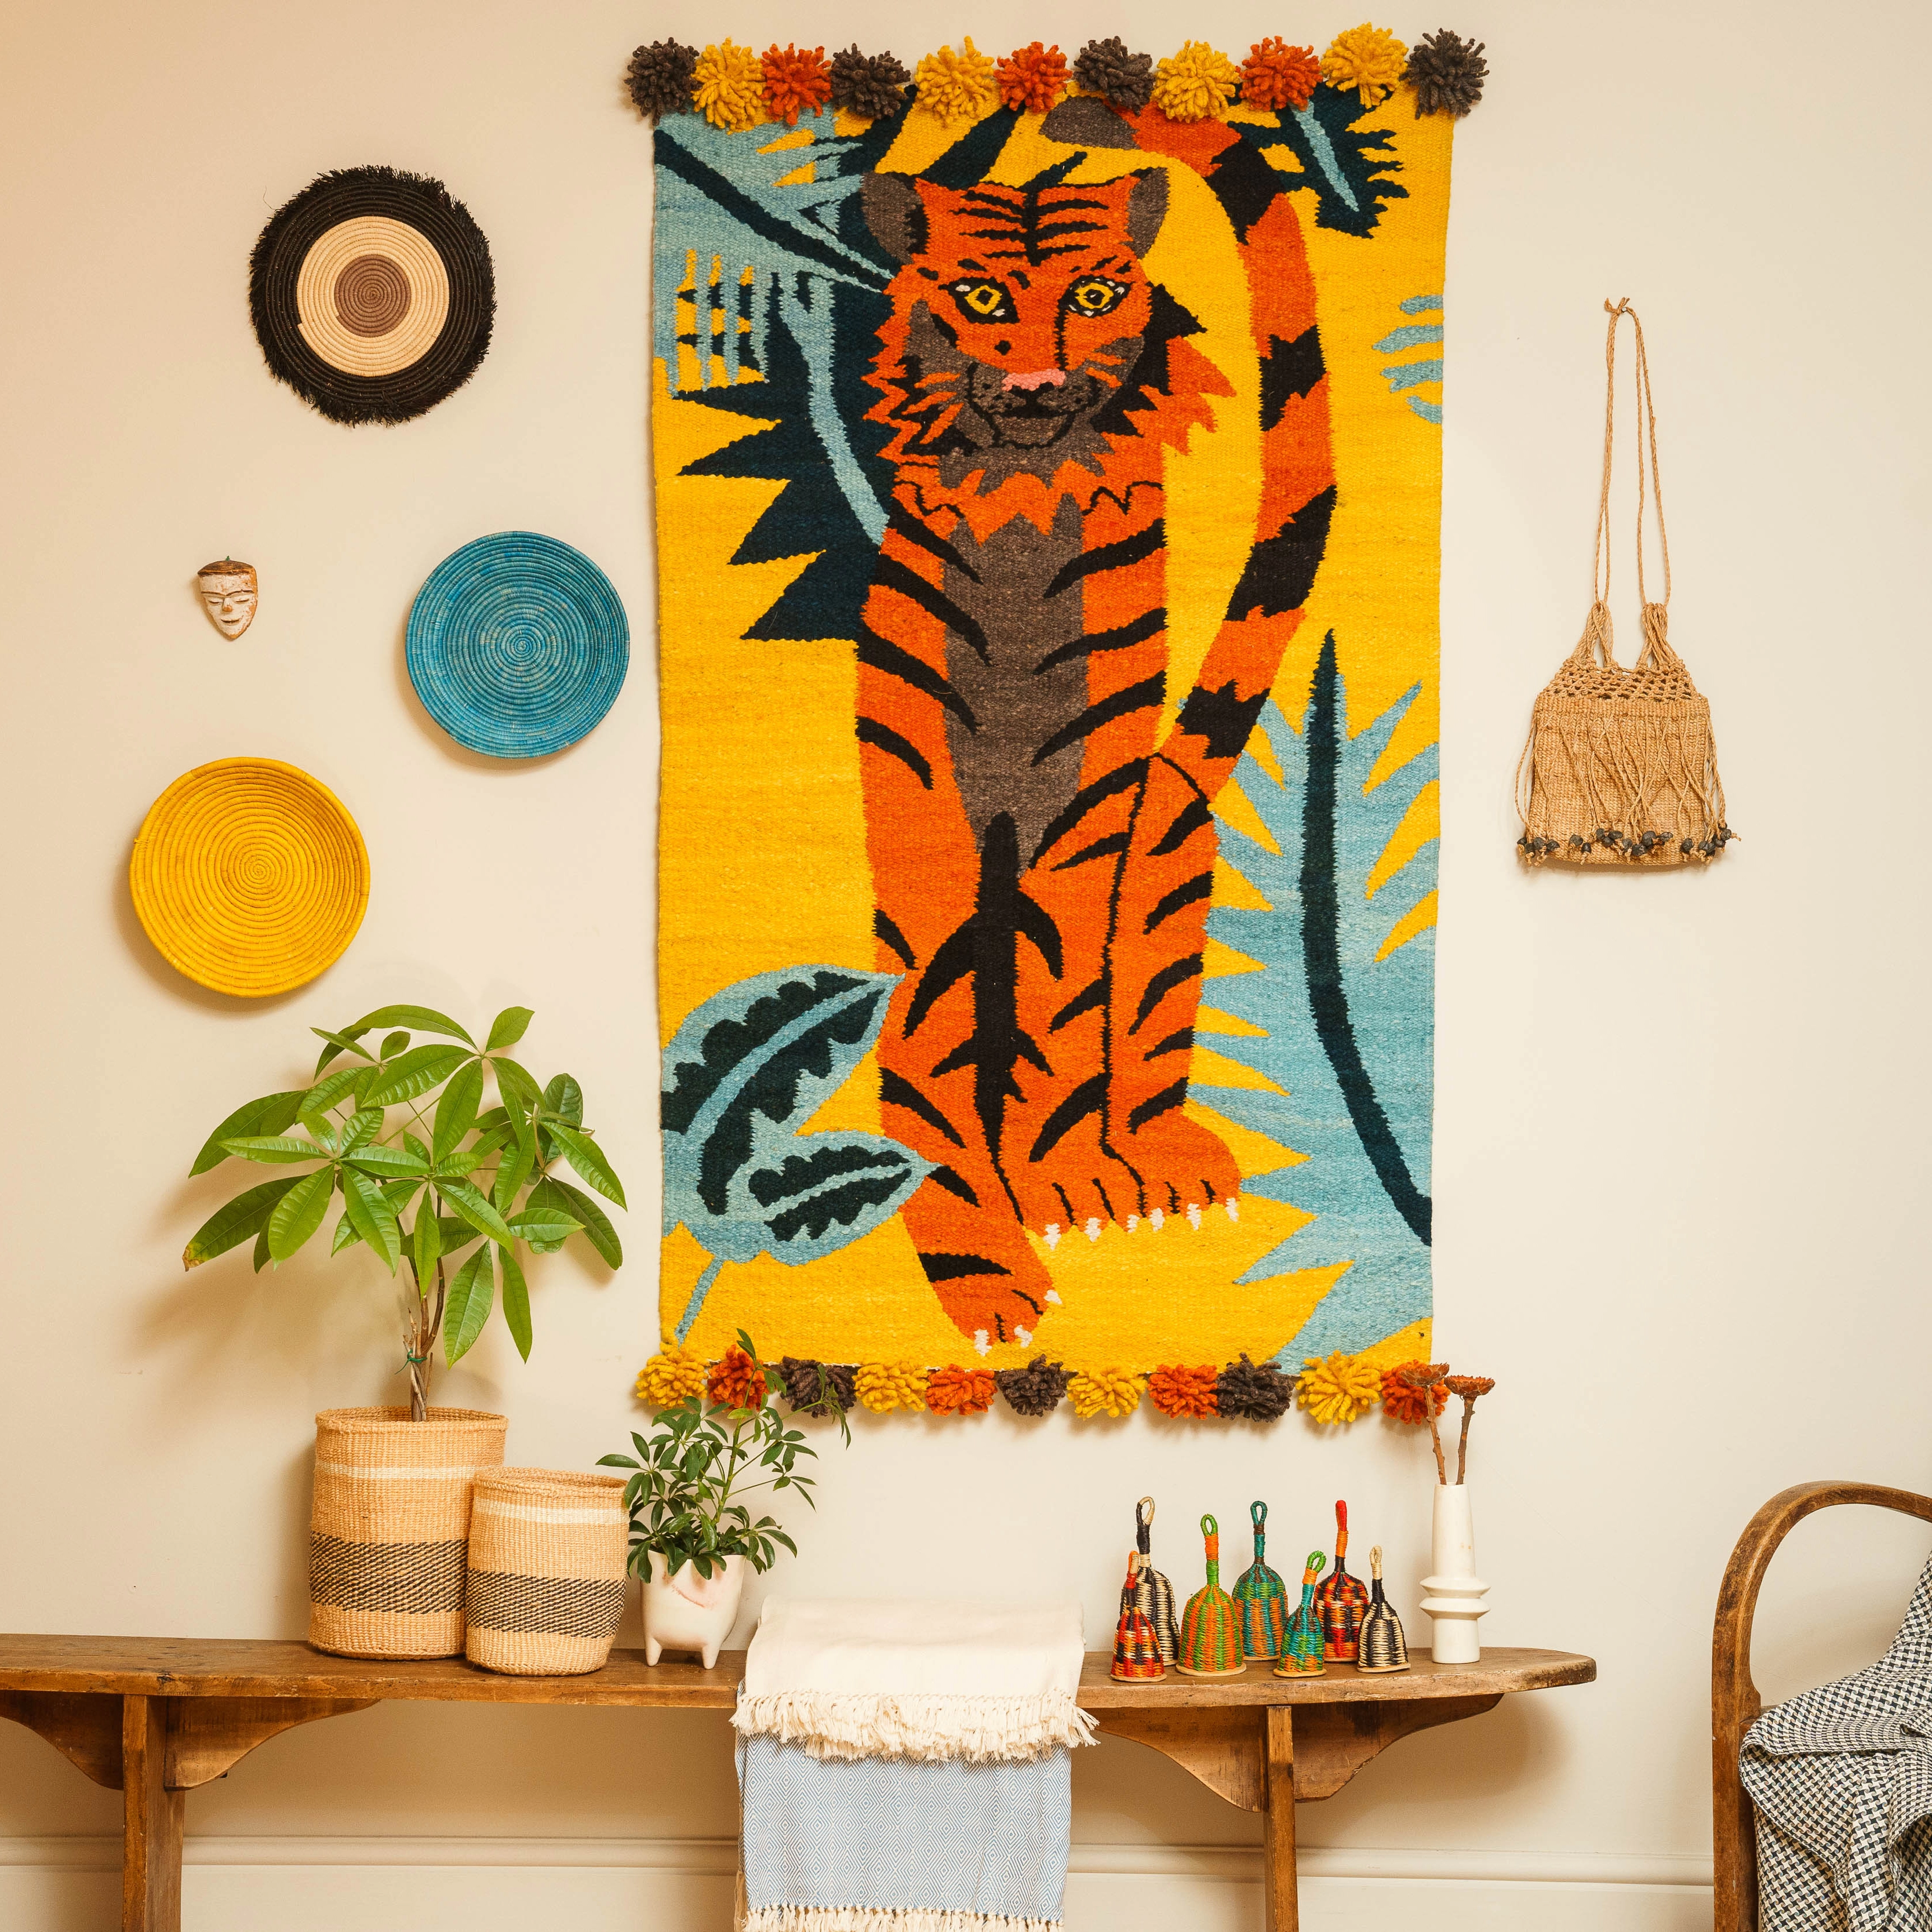 AARVEN Art wall featuring Tiger wall hanging, hand woven baskets and African crafts